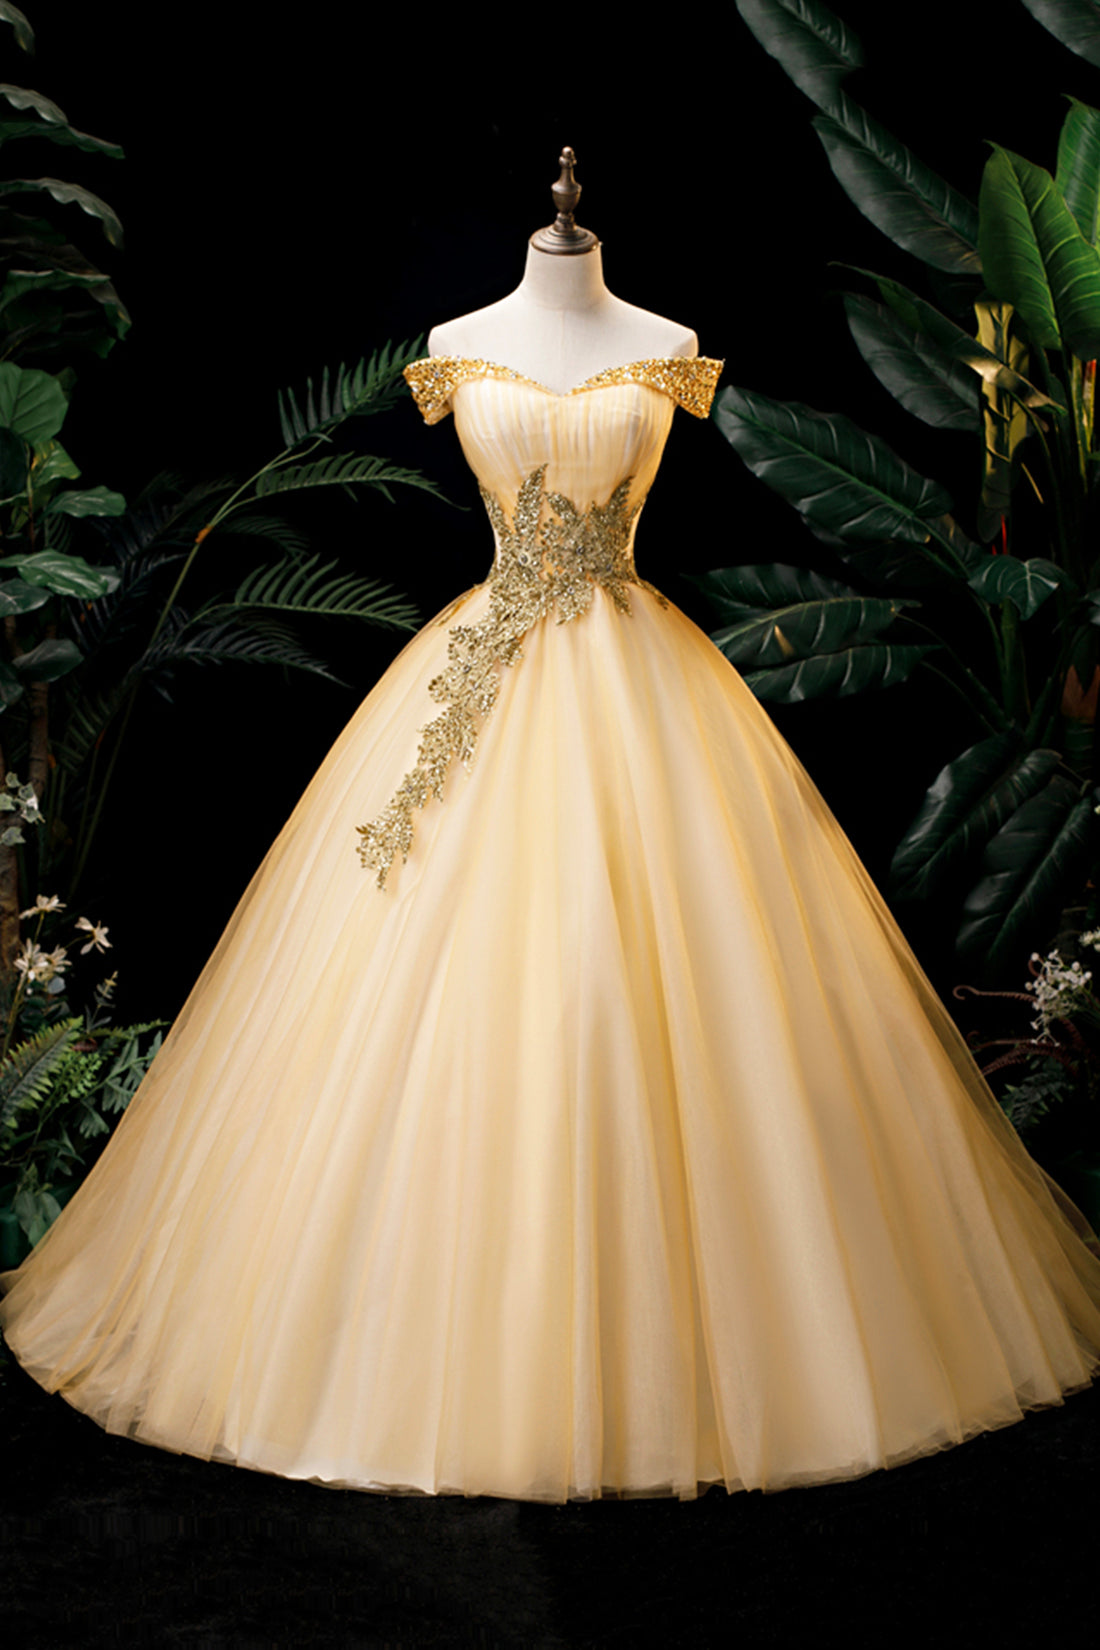 Gold Floor Length Tulle Beading Formal Dress Outfits For Girls, Lovely Off the Shoulder Evening Party Dress